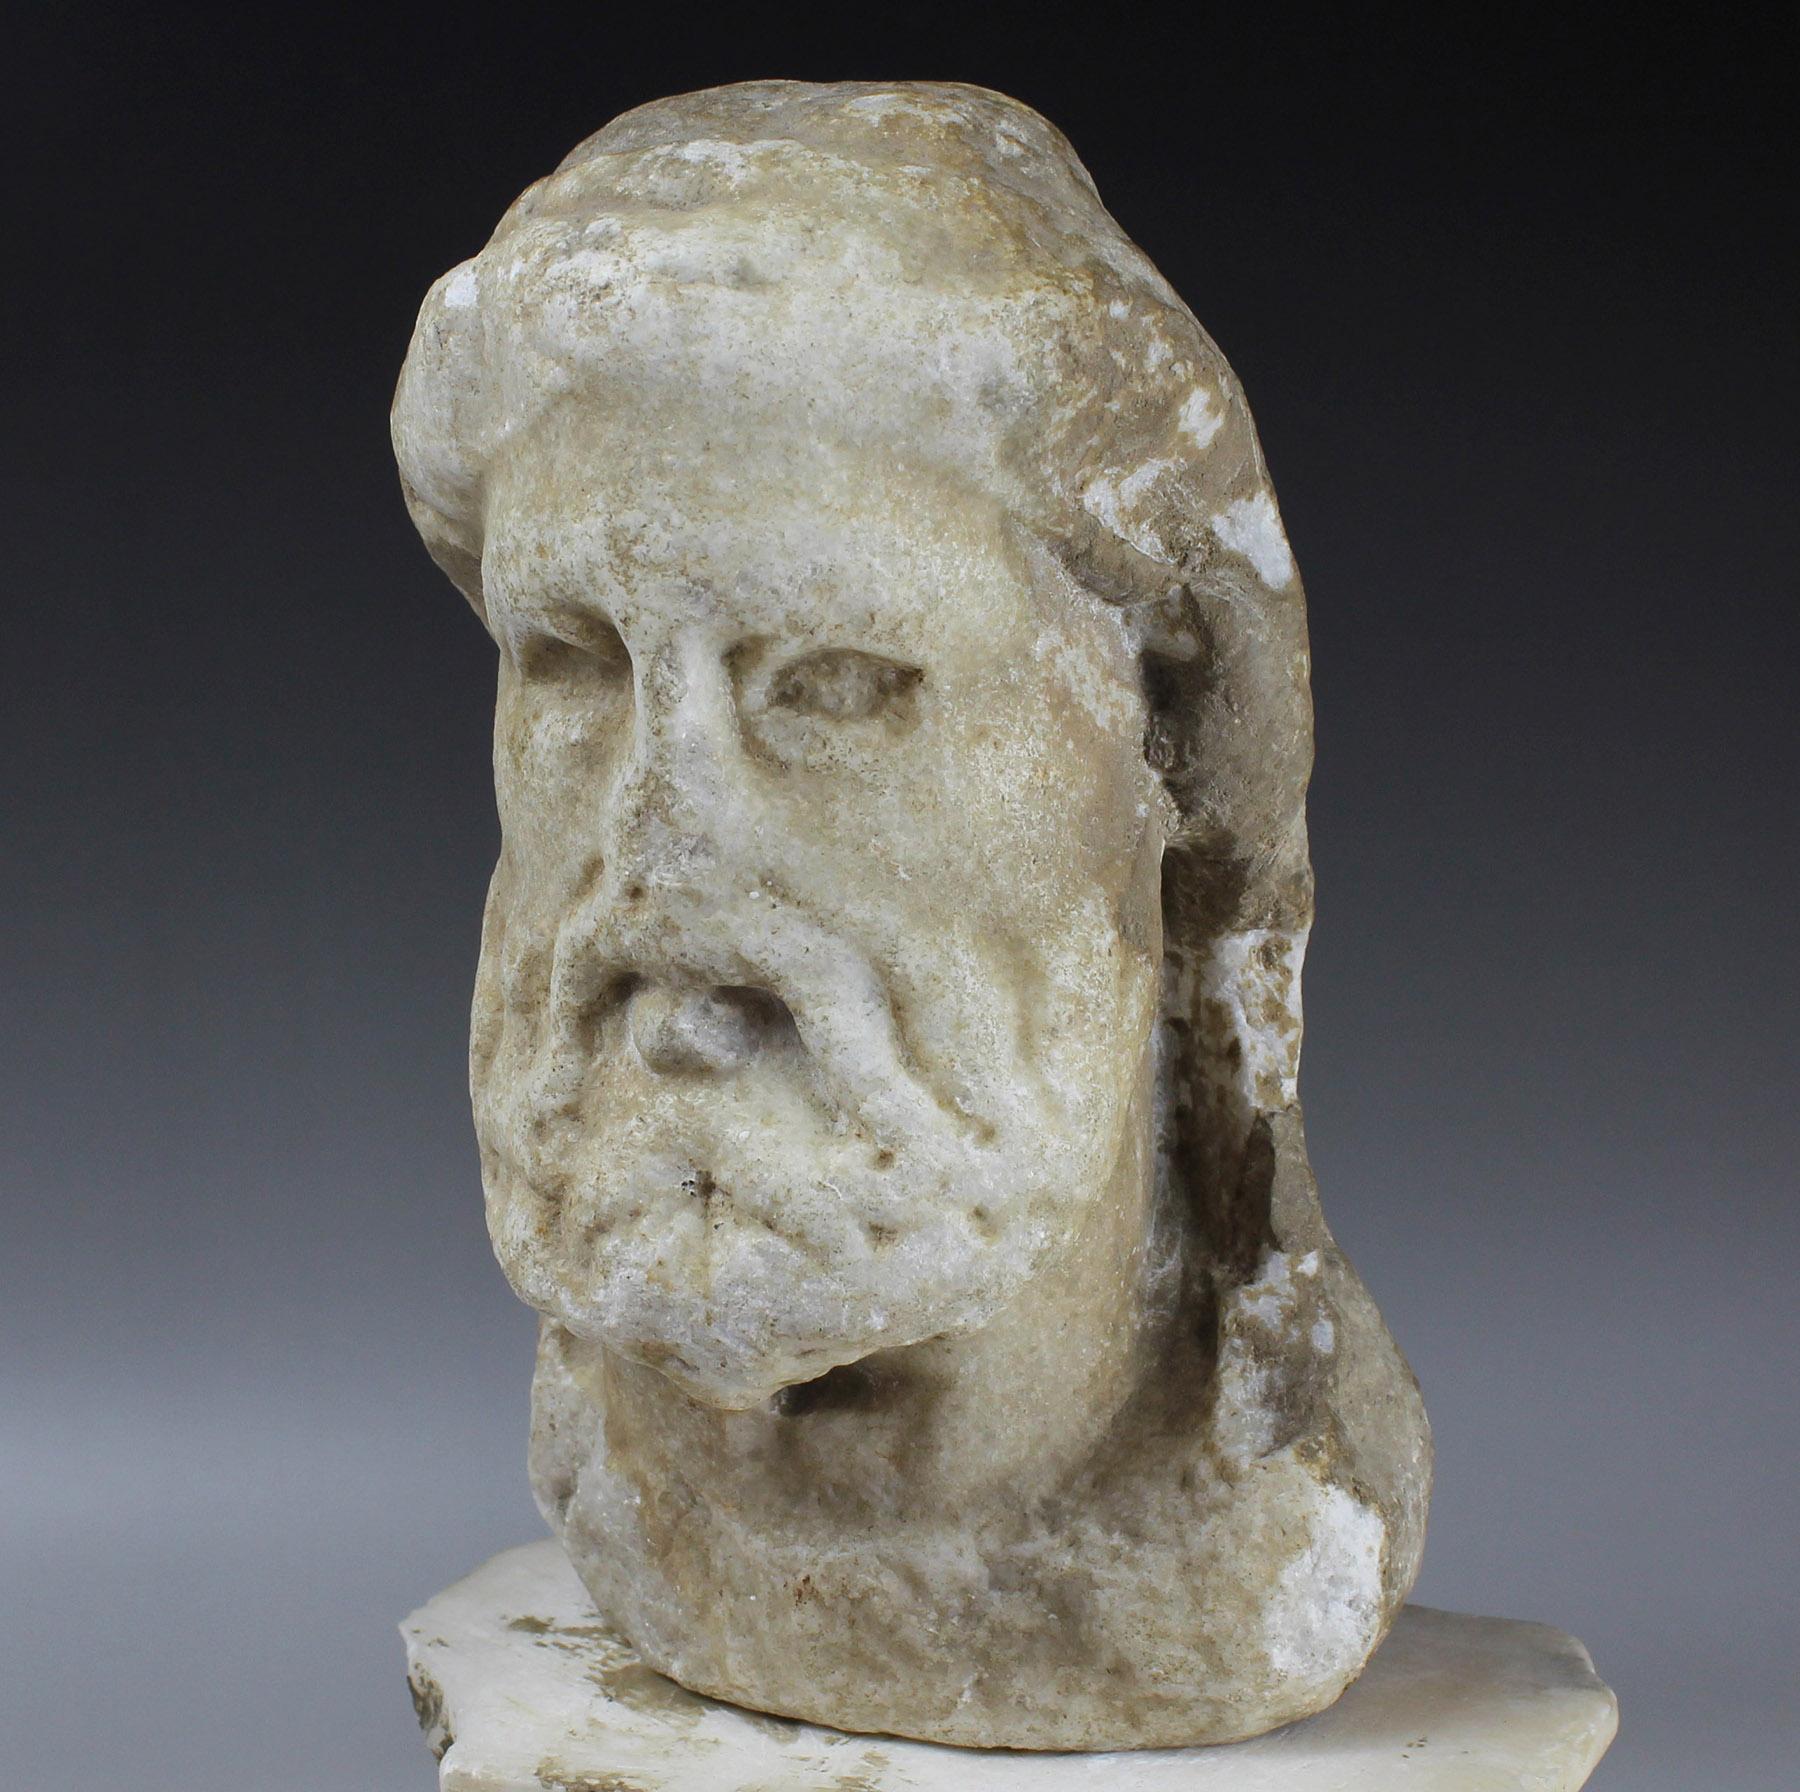 ITEM: Herm of Dionysos
MATERIAL: Marble
CULTURE: Roman
PERIOD: 1st – 2nd Century A.D
DIMENSIONS: 165 mm x 100 mm x 65 mm (without stand)
CONDITION: Good condition. Include stand
PROVENANCE: Ex European collection, Mr. L., bought on the French